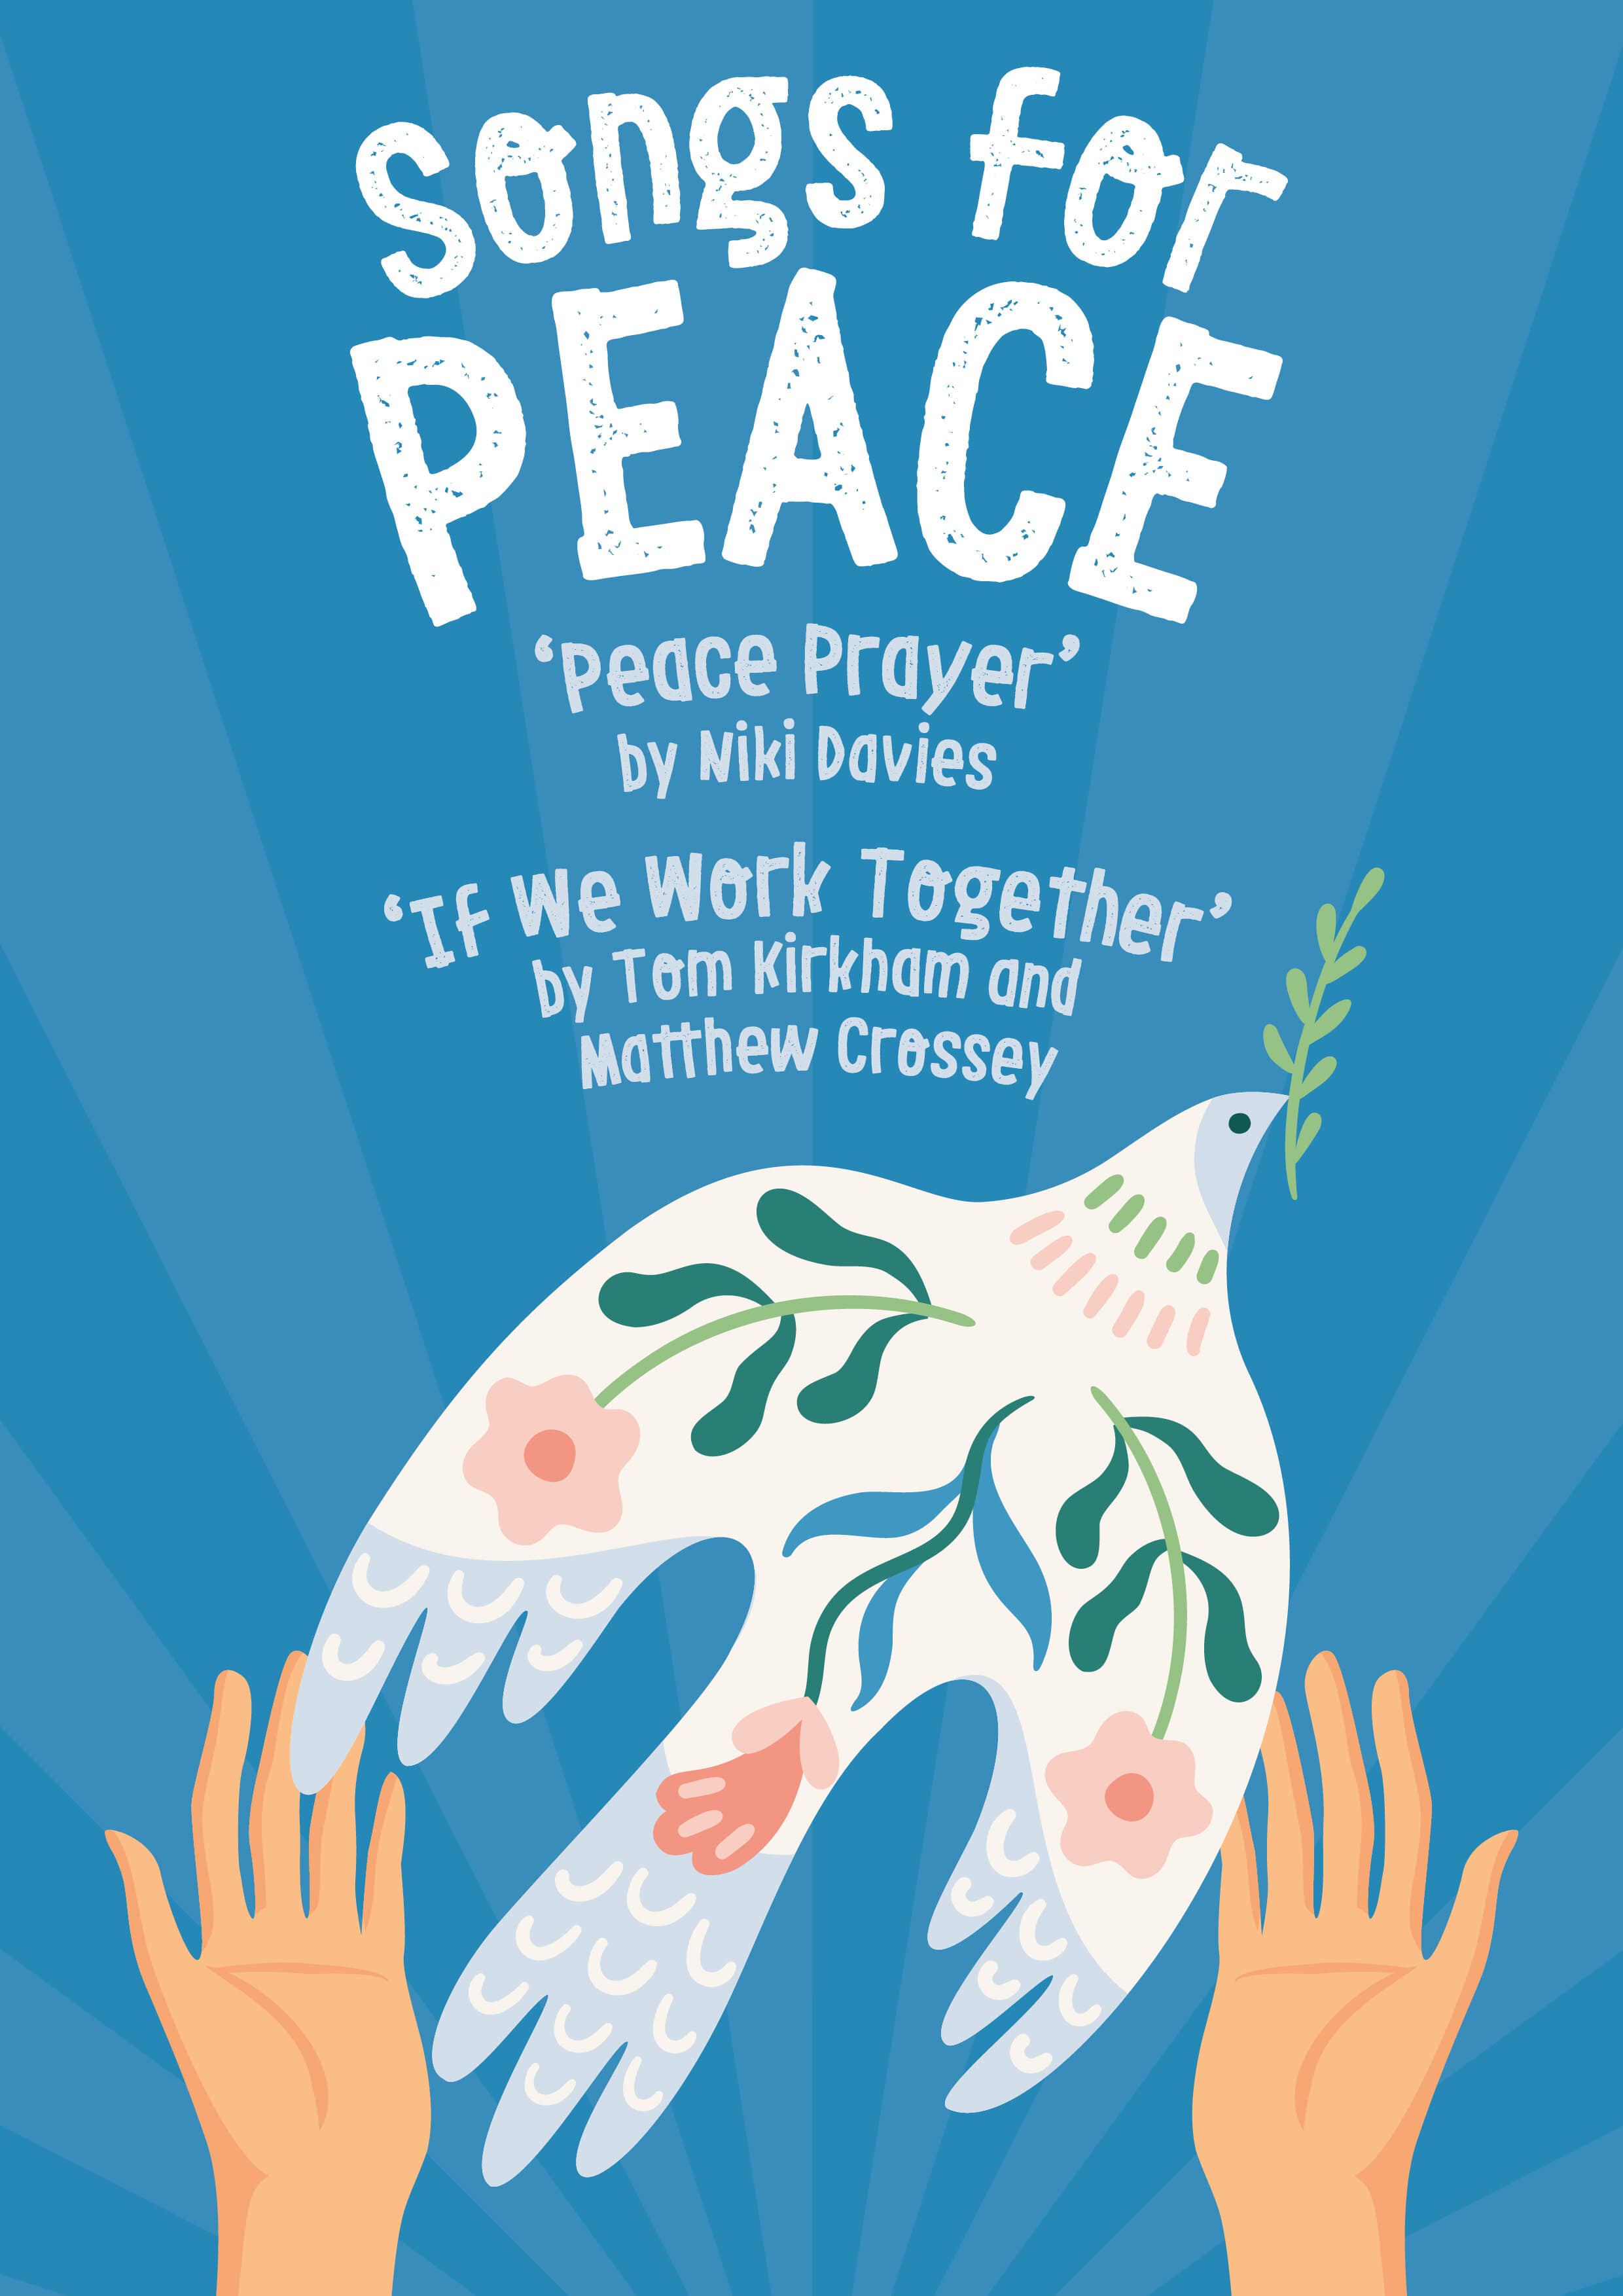 SONGS FOR PEACE - 100% discount with code PEACE100